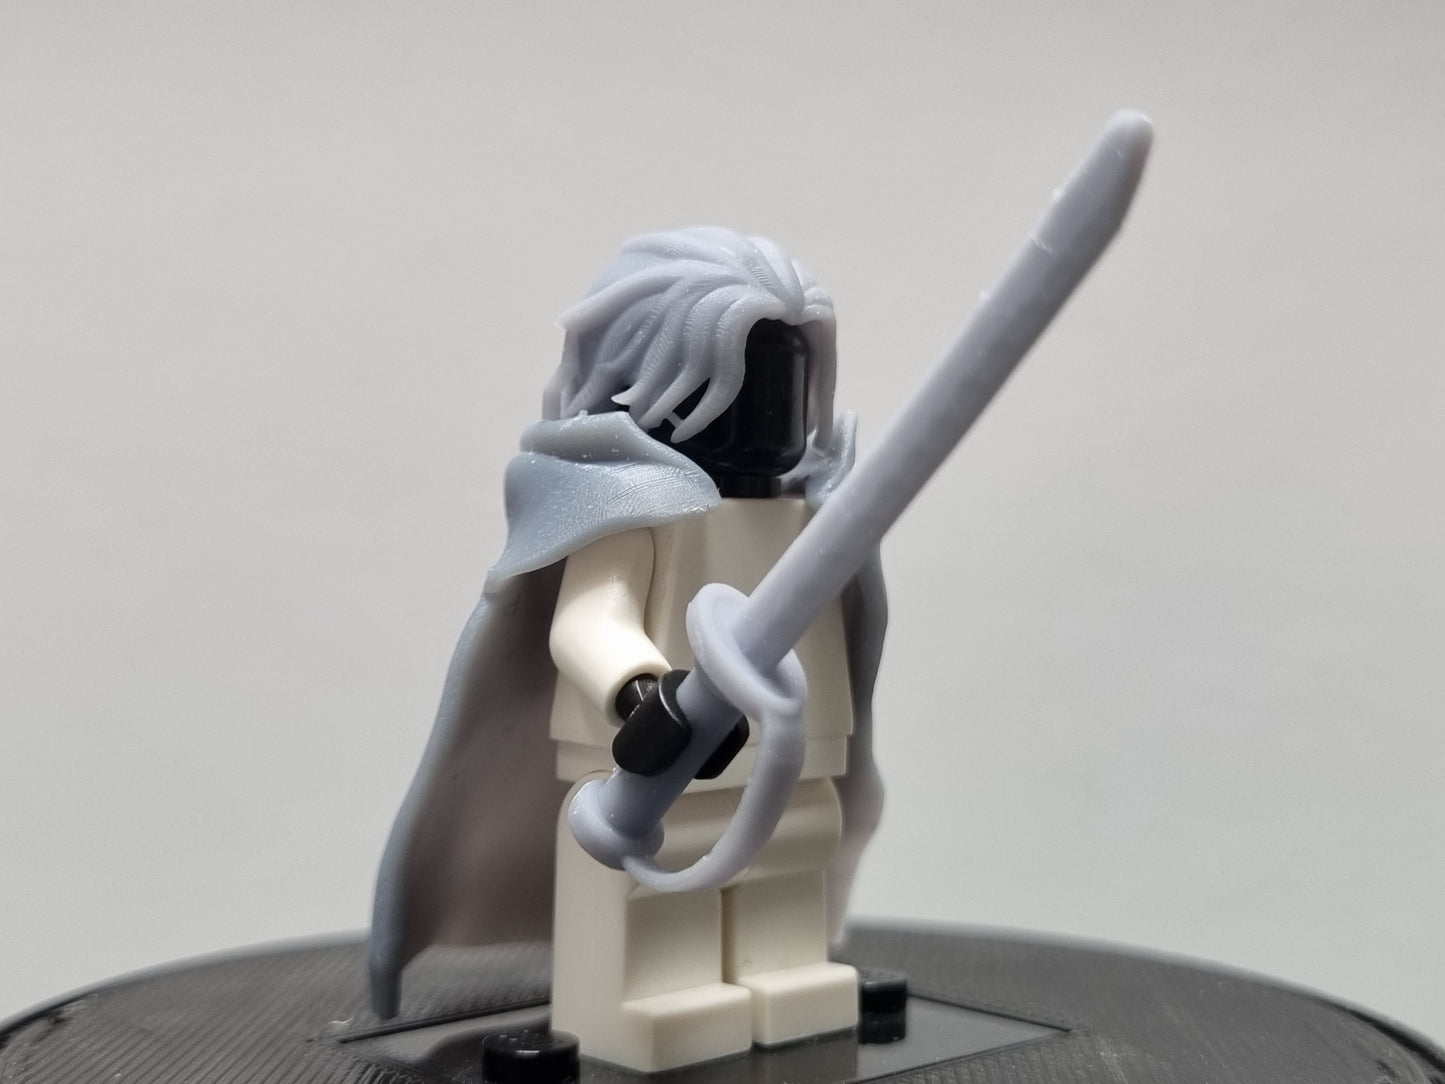 Custom Lego compatible One armed man 3D printed set!